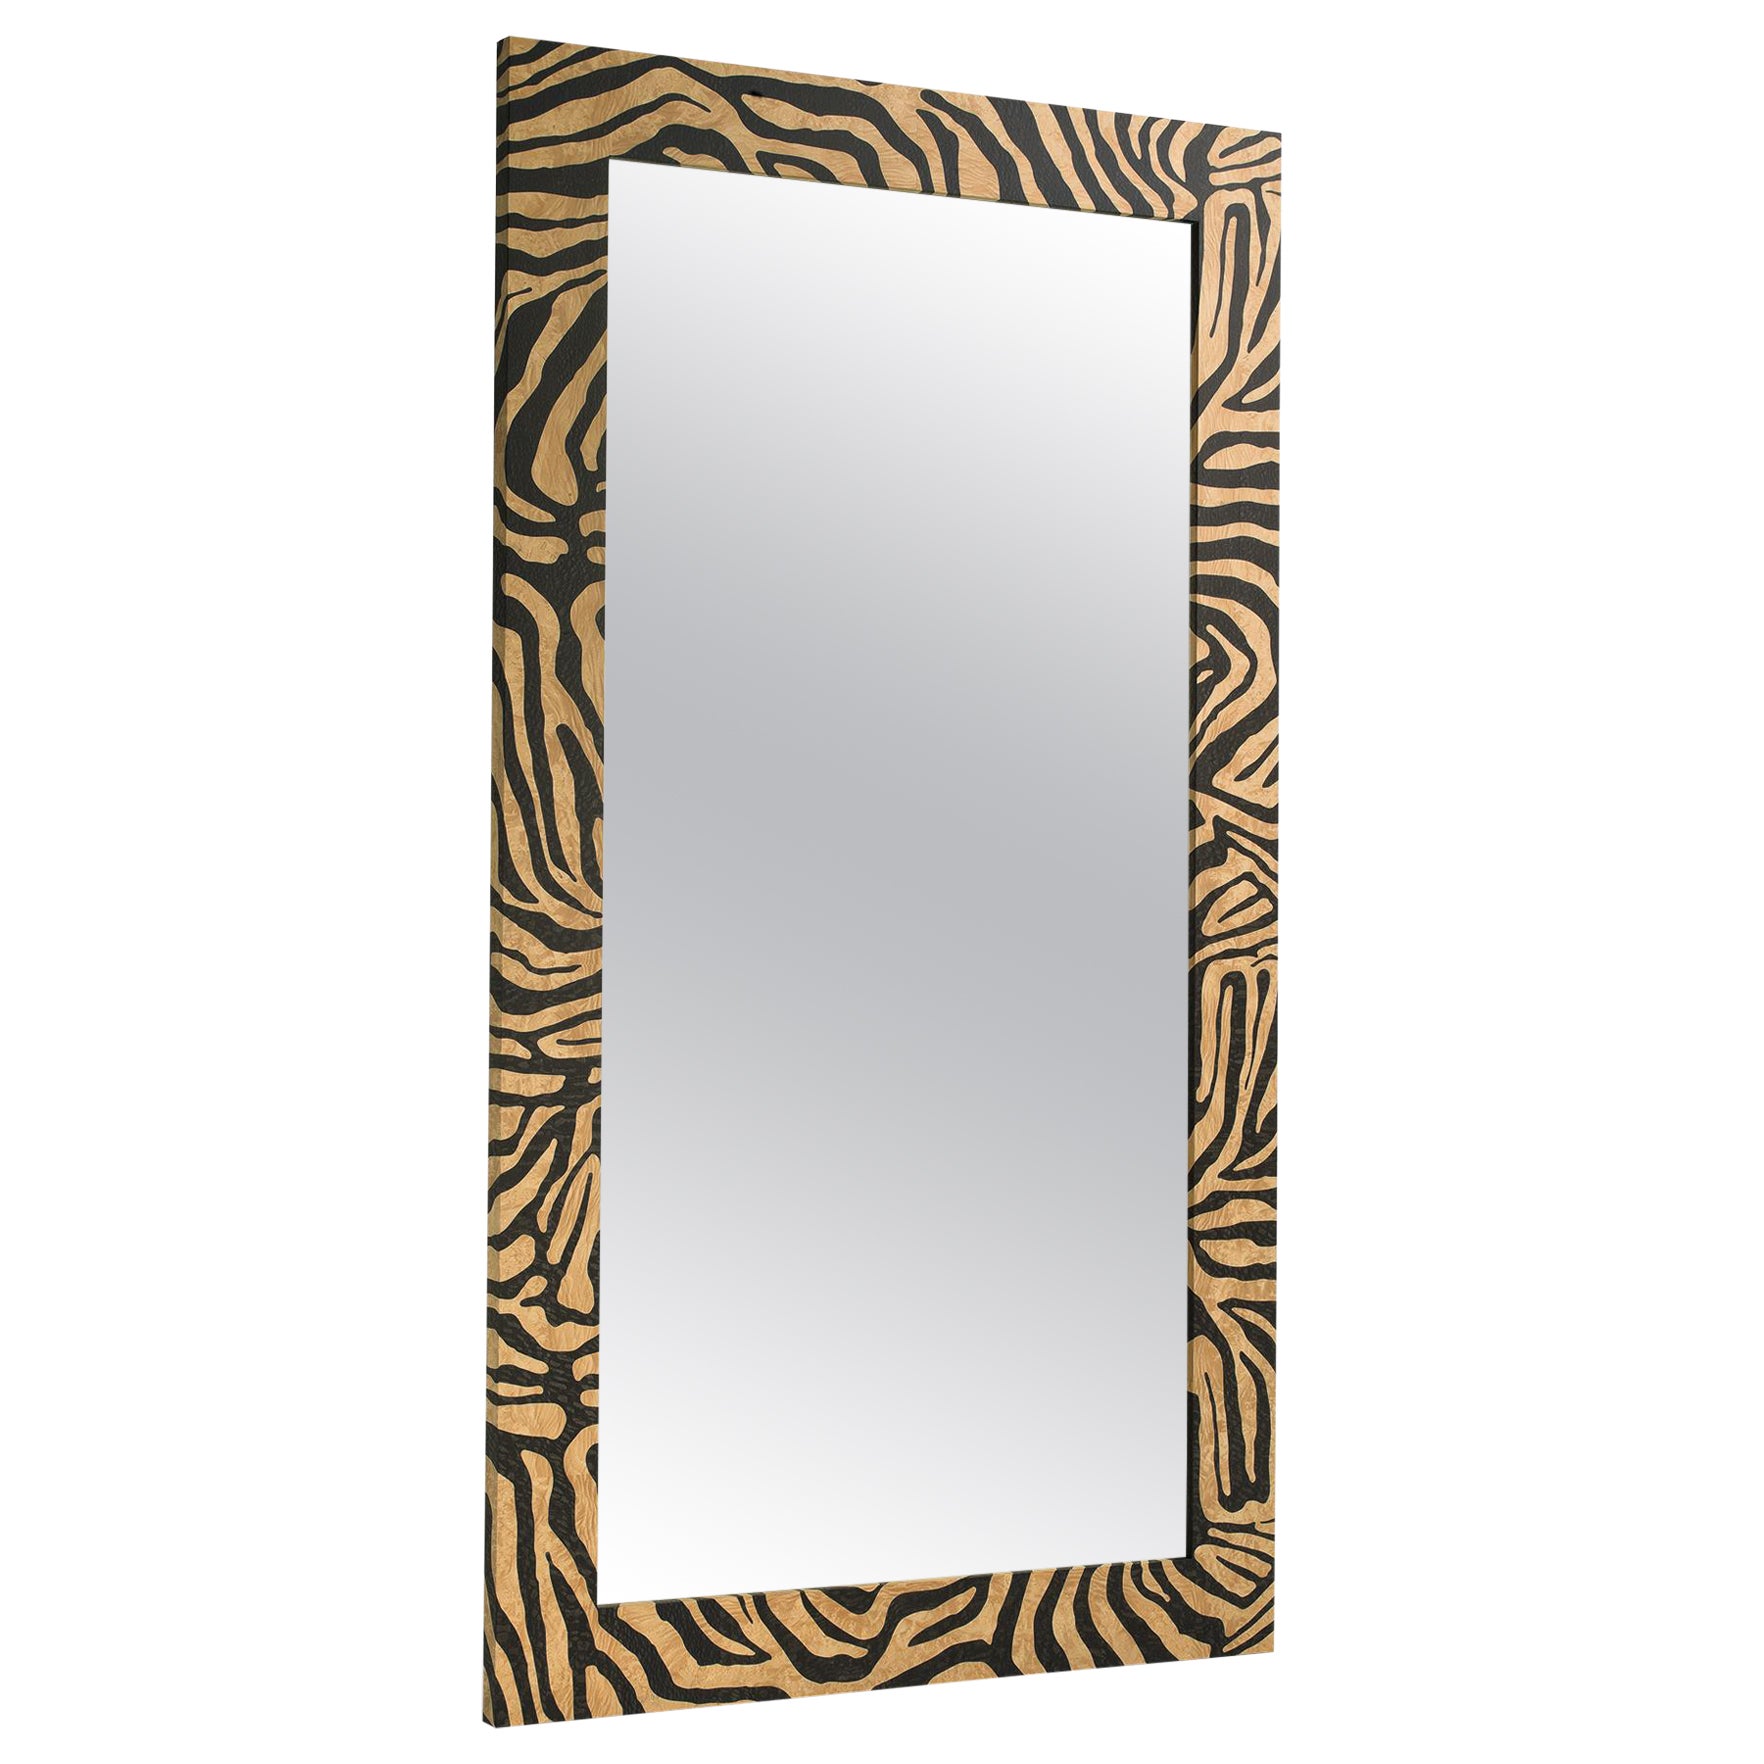 Kivu Mirror with Solid Wood Structure, Zebra Inlay and Bronzed Mirror